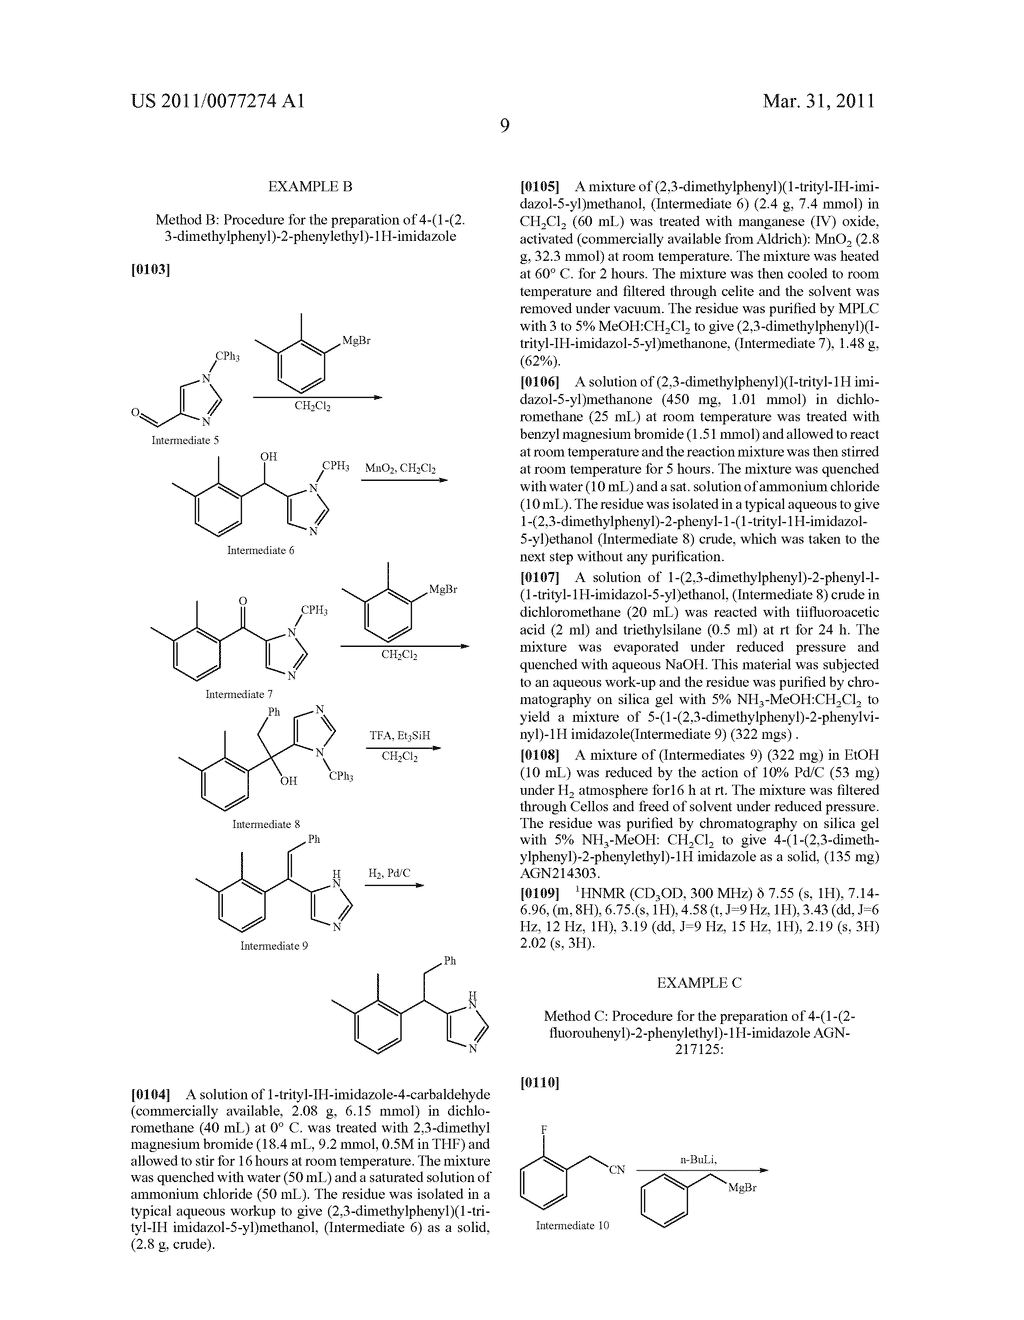 SUBSTITUTED-ARYL-2-PHENYLETHYL-1H-IMIDAZOLE COMPOUNDS AS SUBTYPE SELECTIVE MODULATORS OF ALPHA 2B AND/OR ALPHA 2C ADRENERGIC RECEPTORS - diagram, schematic, and image 10